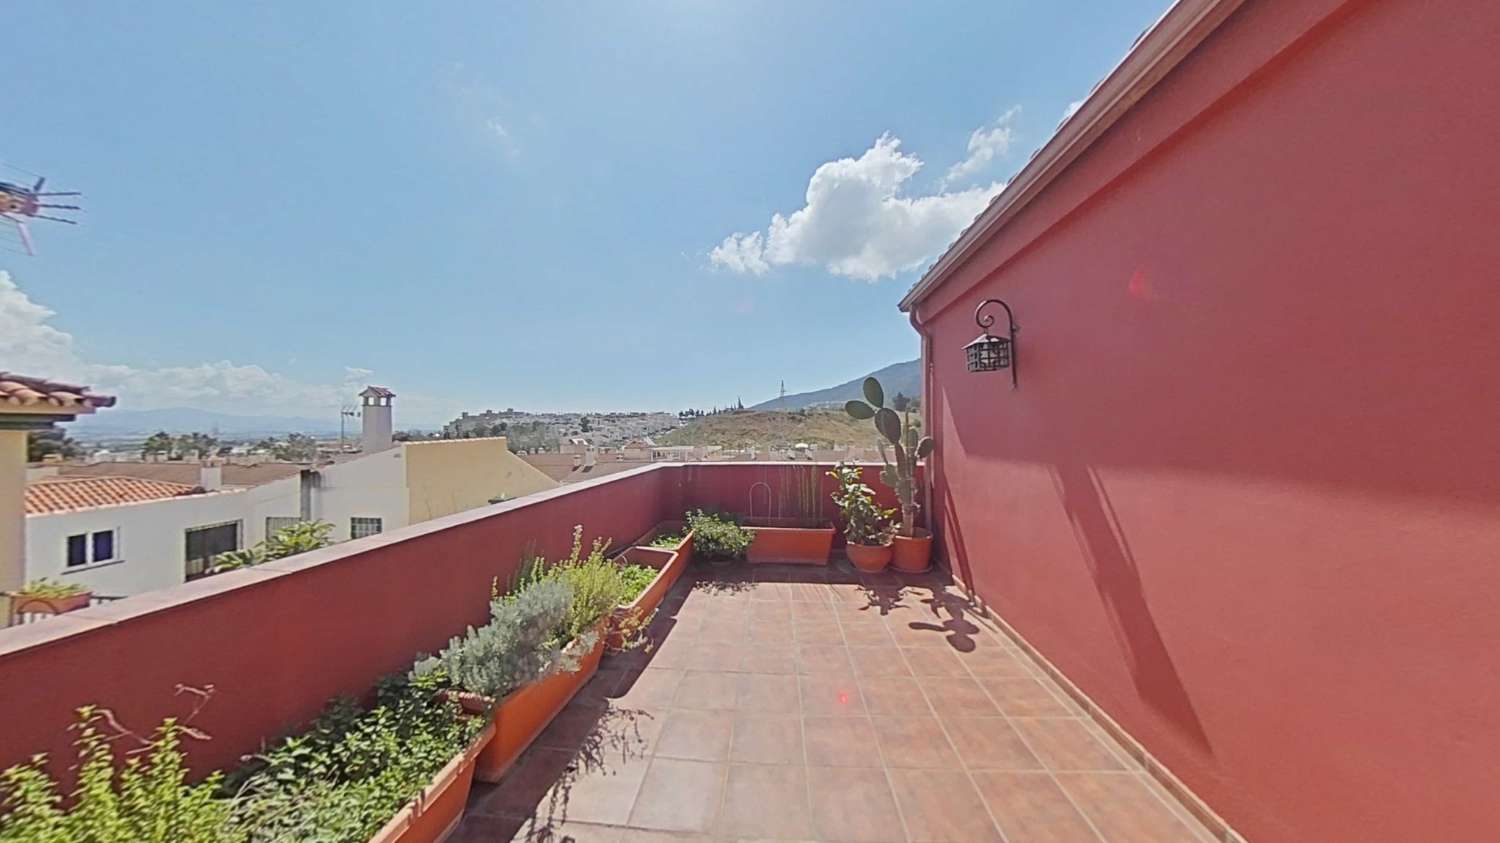 Semi-detached house with 4 bedrooms, garage, semi-basement and large terrace with views